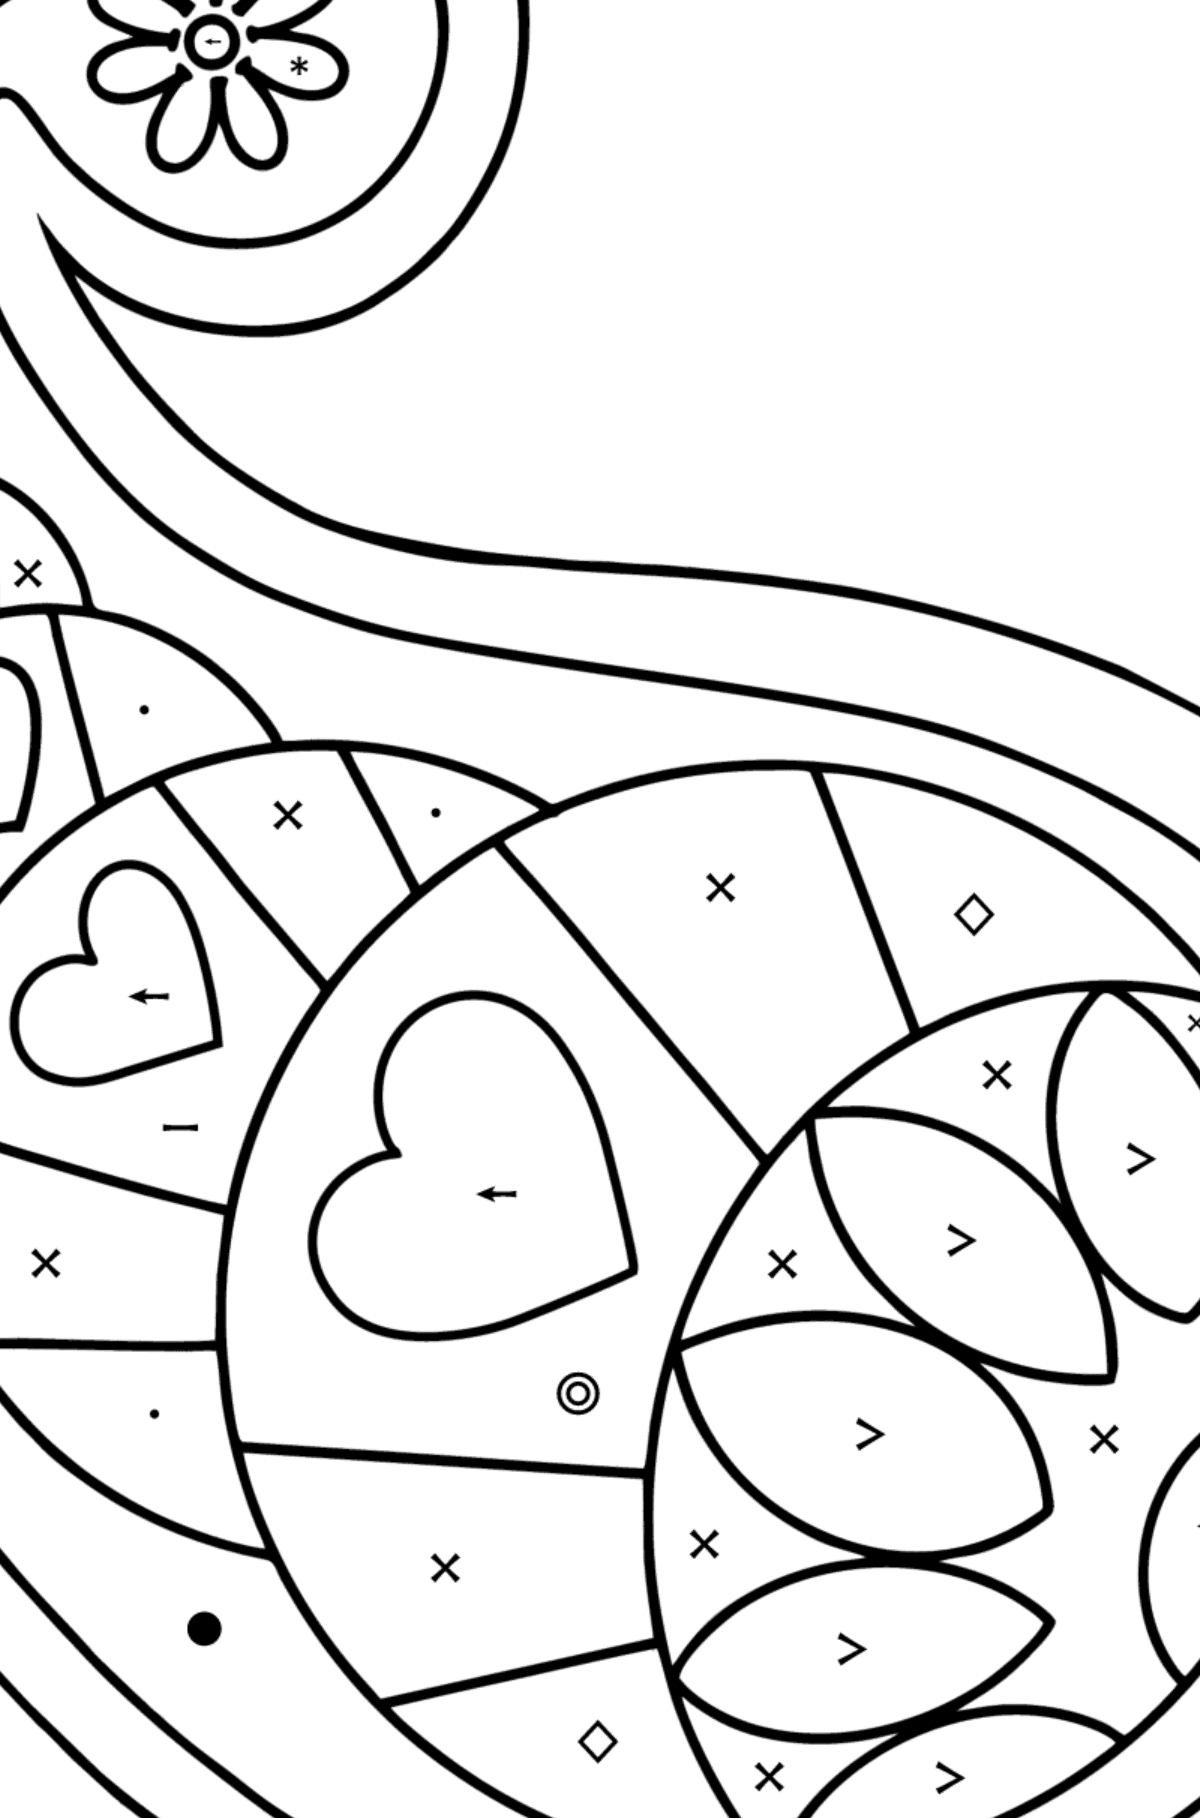 Paisley design coloring page - Coloring by Symbols and Geometric Shapes for Kids